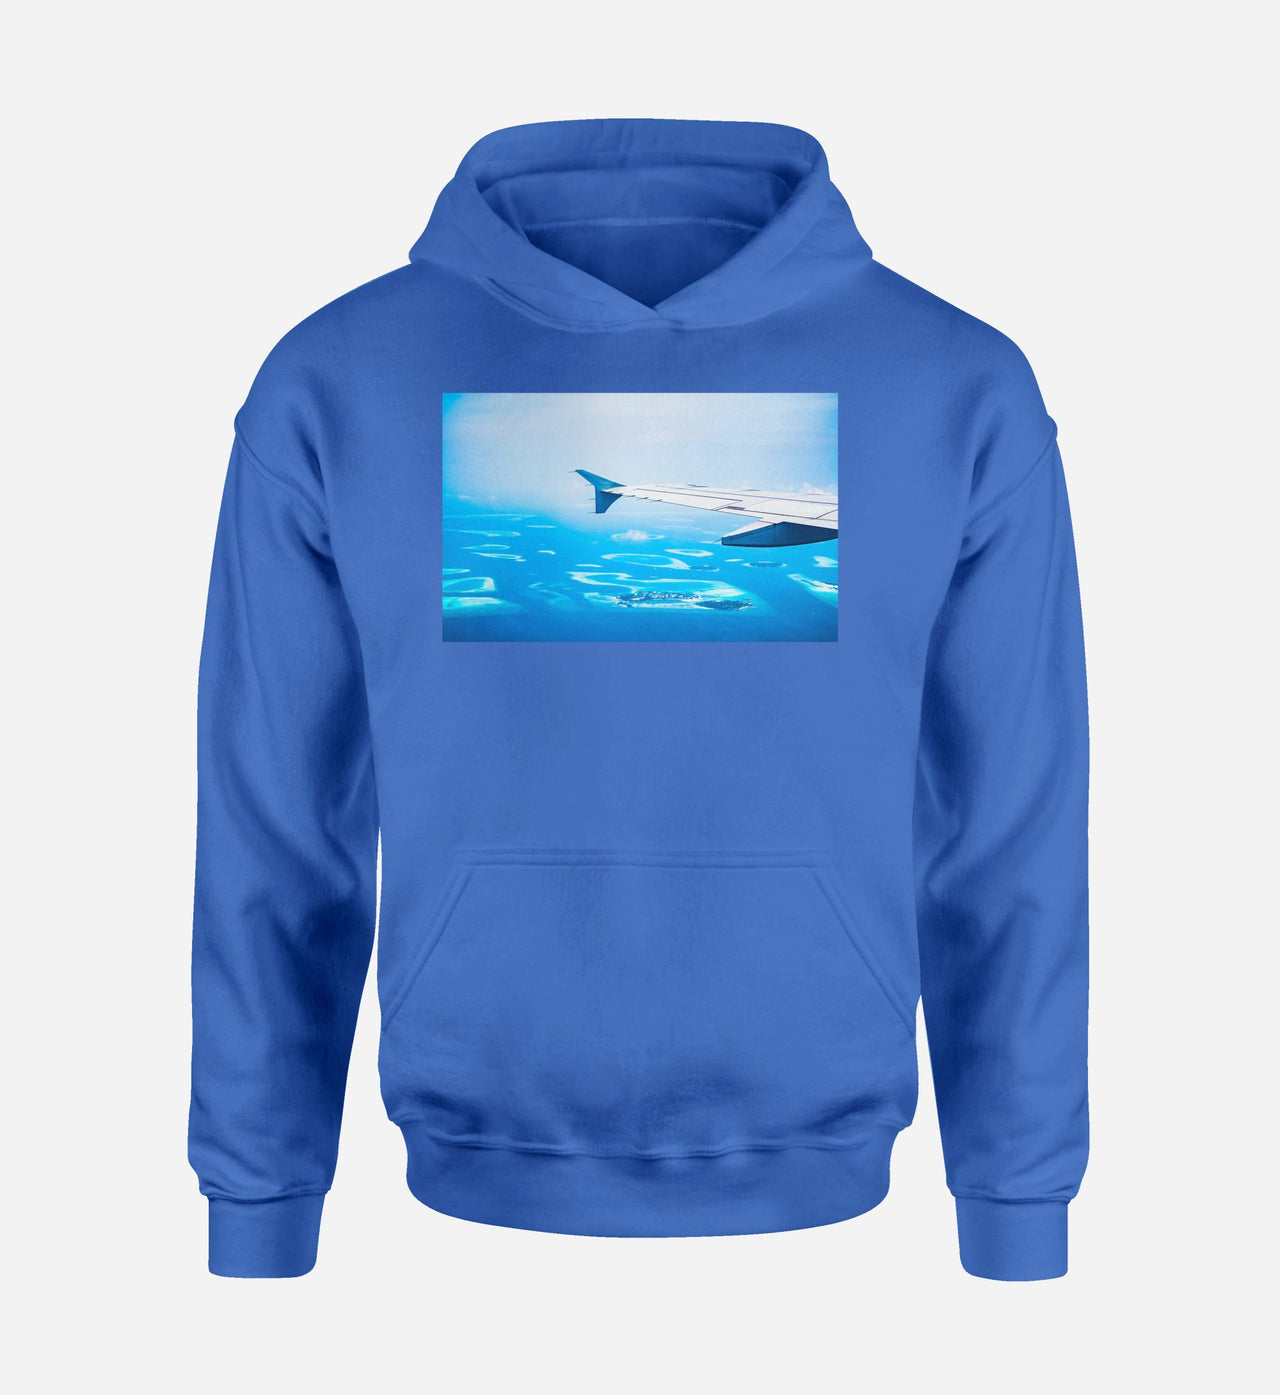 Outstanding View Through Airplane Wing Designed Hoodies